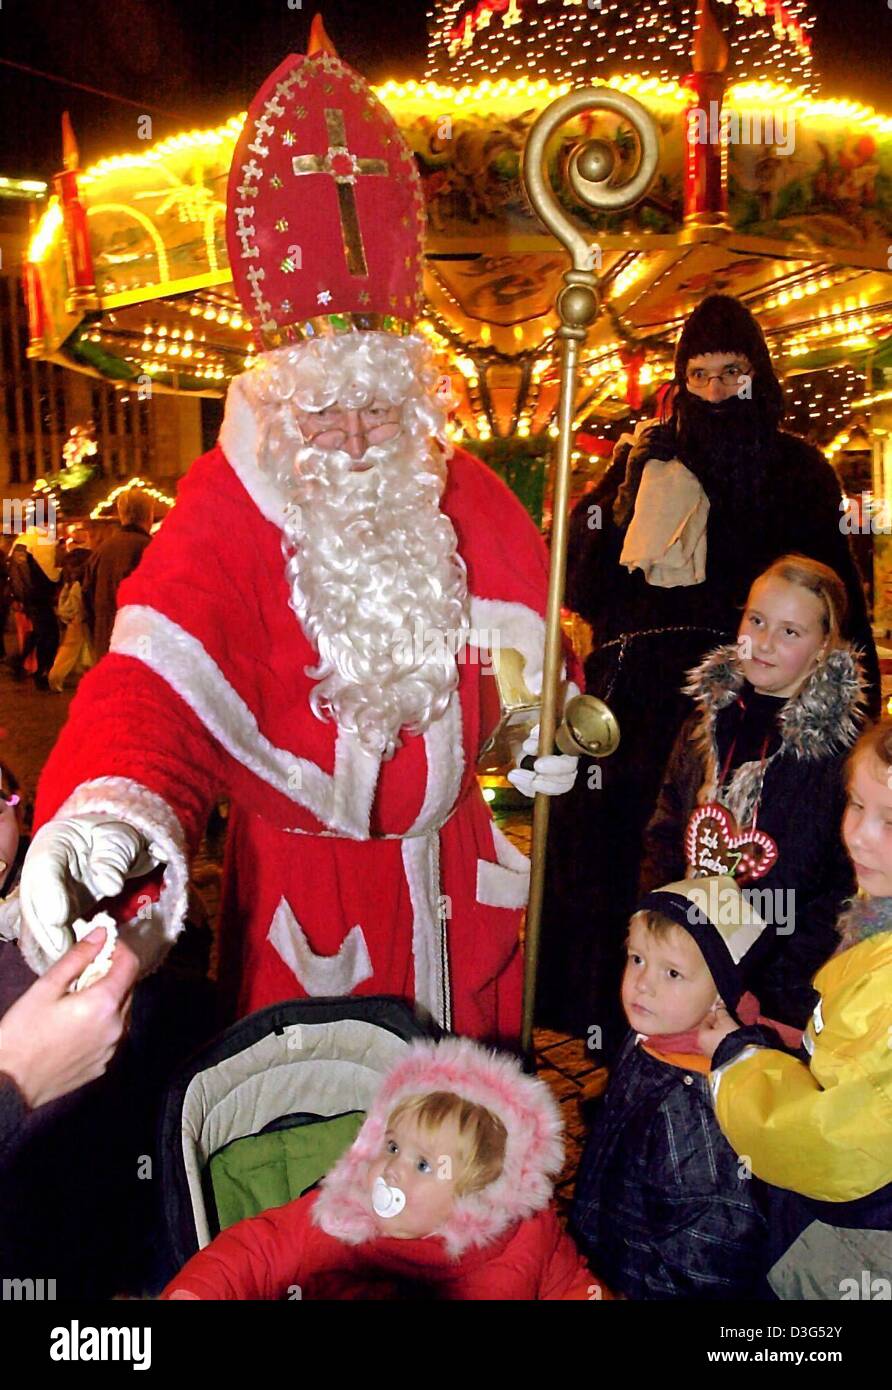 (dpa) - Heinz-Juergen Preuss is dressed as Saint Nicolaus on the Christmas market in Dortmund, Germany, 25 November 2003. The original Father Christmas is Saint Nicolaus from Turkey, who lived ca 300 years after Christ. As a bishop in Myra, he is known as a person who often helped people (especially children) in distress. Because he was so good and helped young people in need, he h Stock Photo